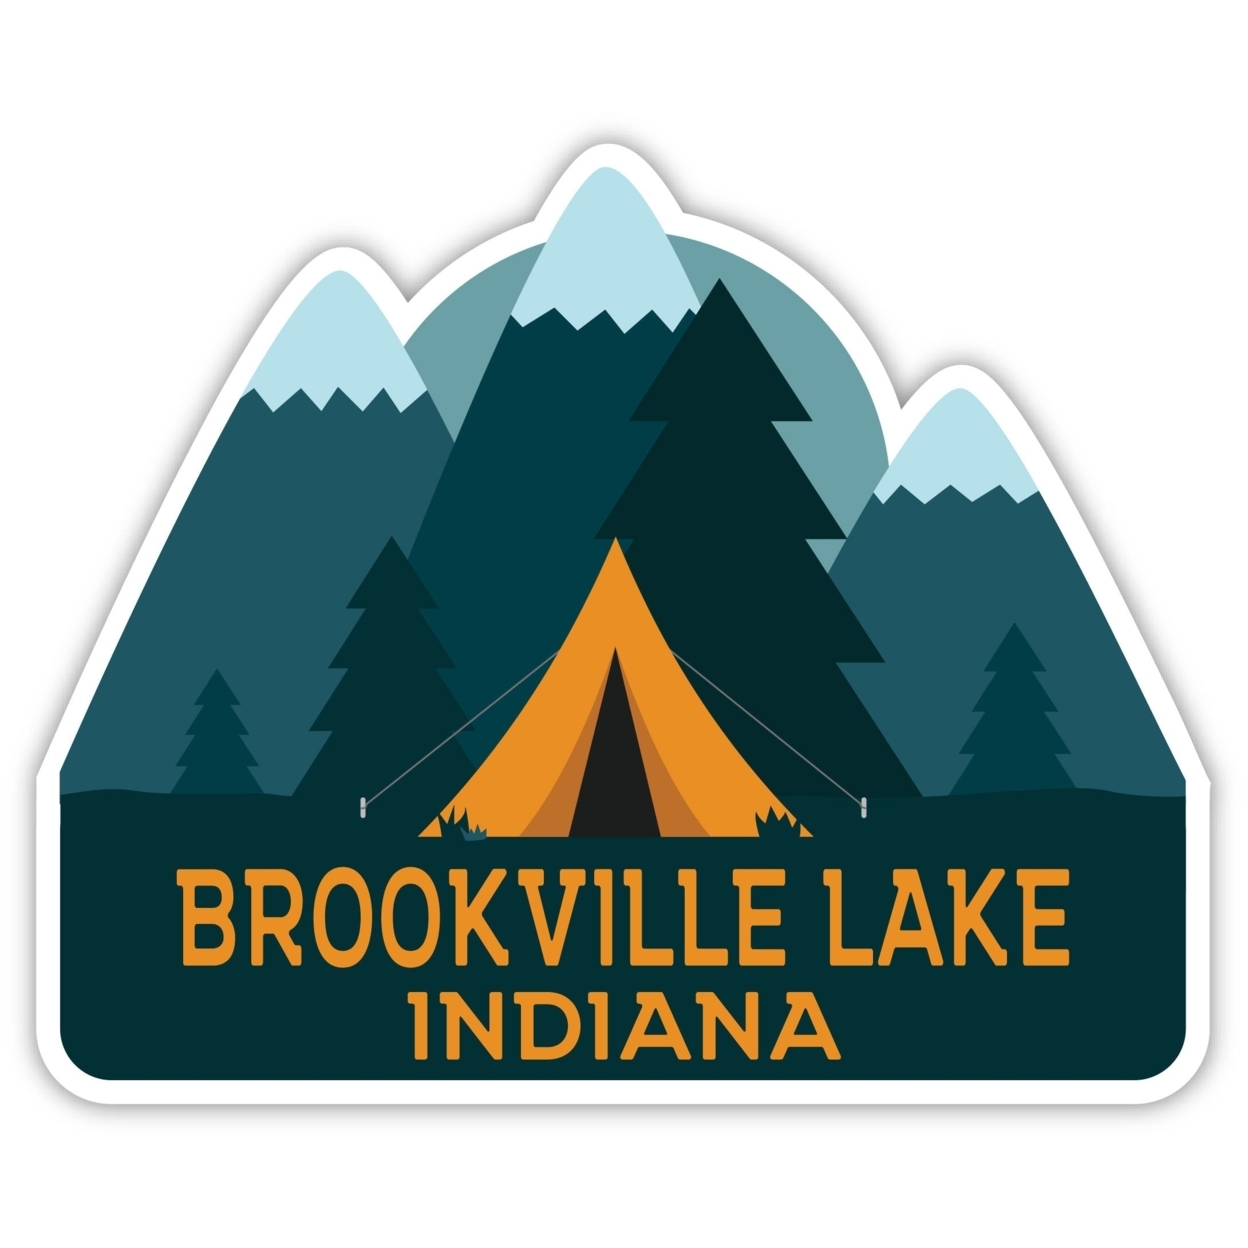 Brookville Lake Indiana Souvenir Decorative Stickers (Choose Theme And Size) - 4-Pack, 12-Inch, Tent